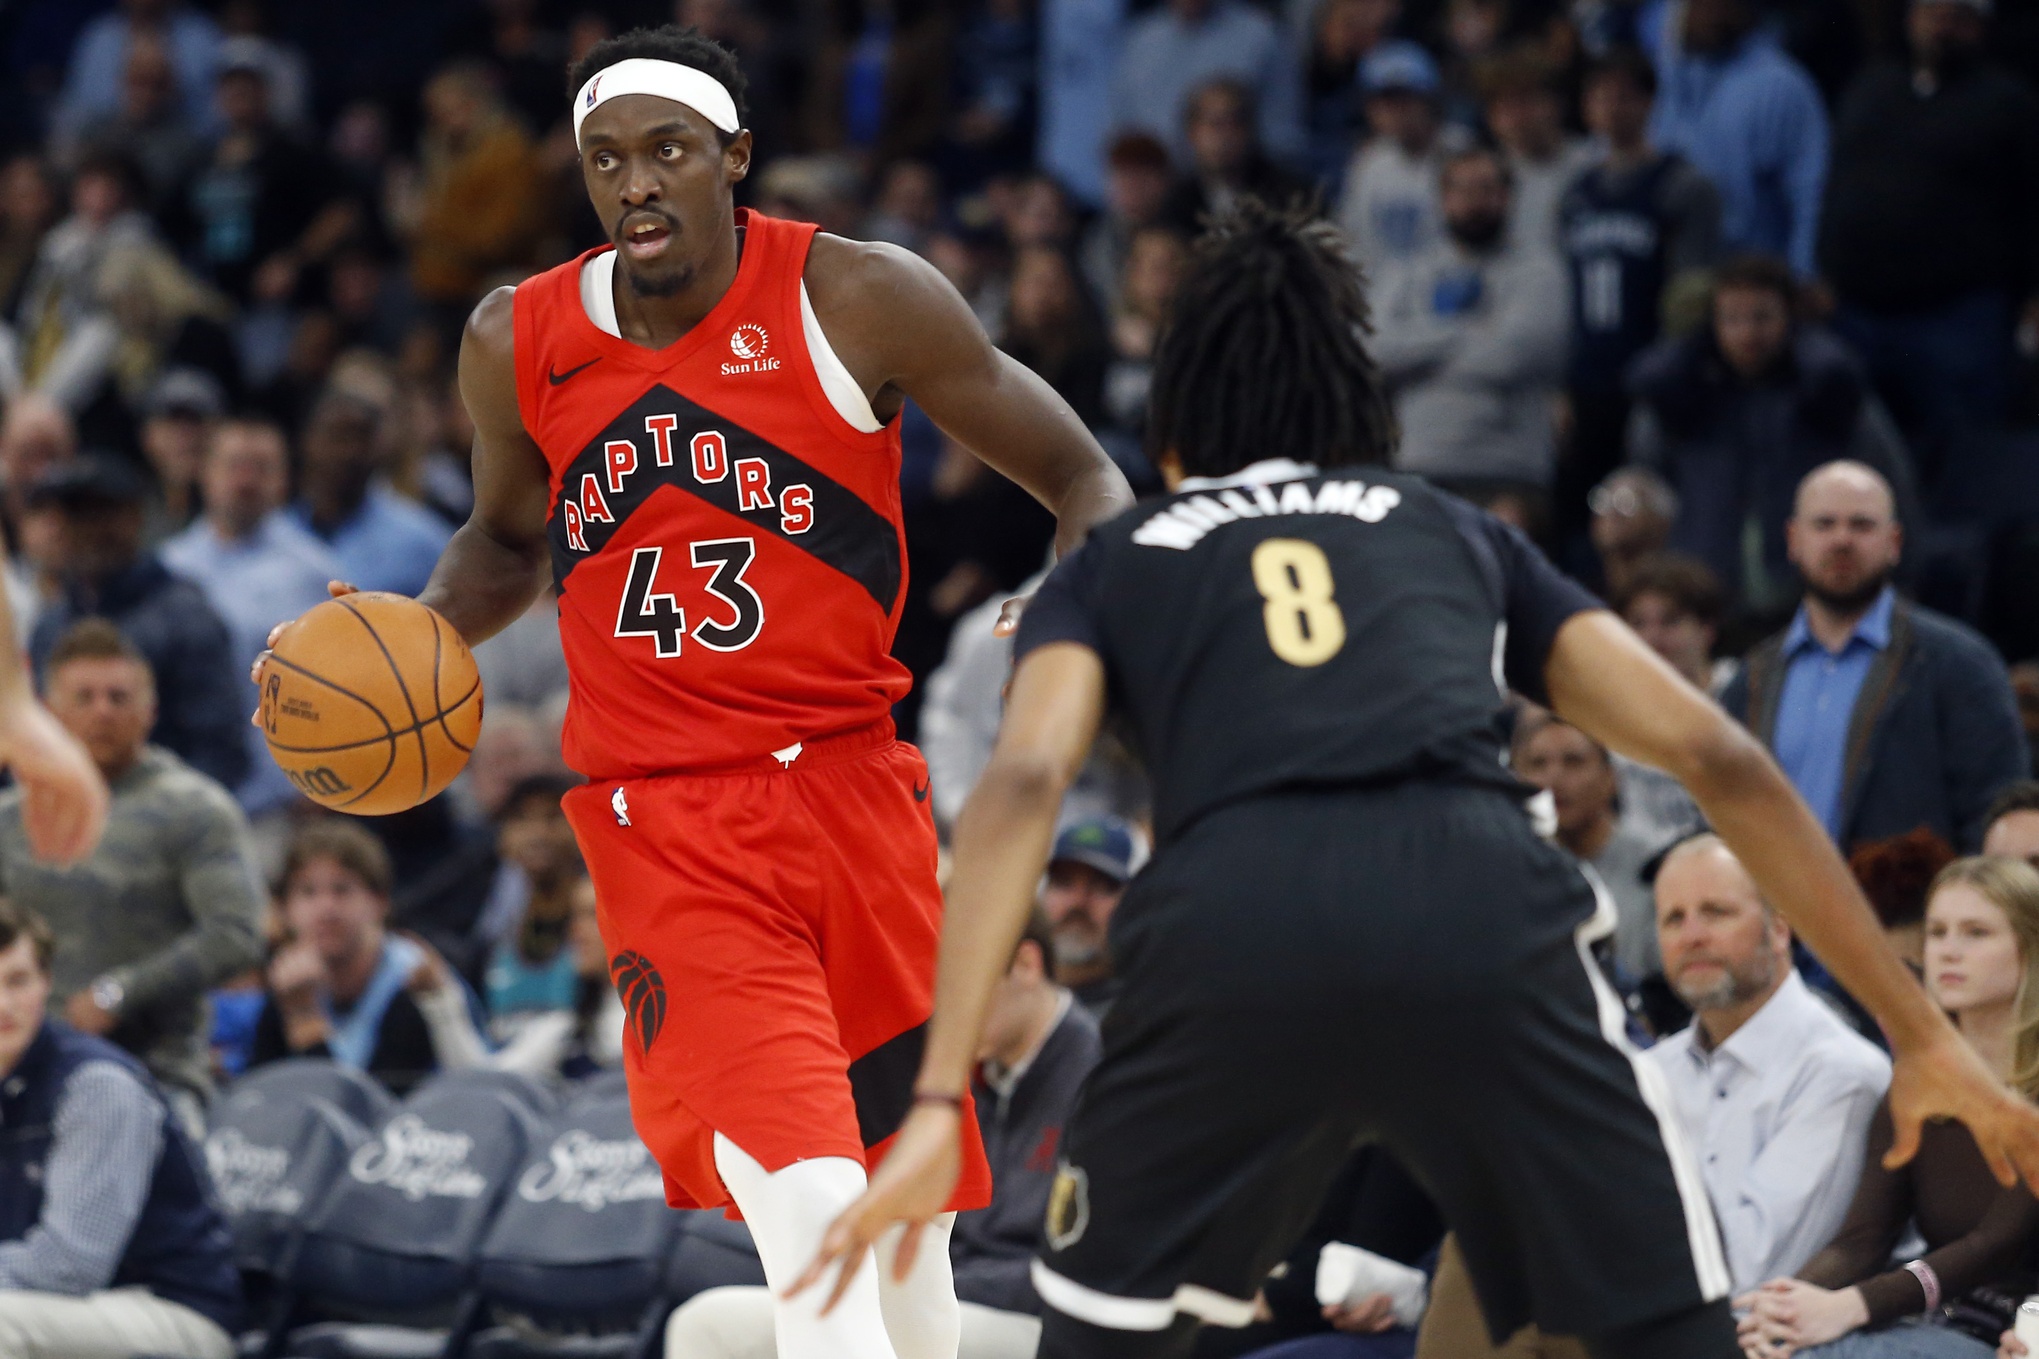 Toronto Raptors forward Pascal Siakam (43) dribbles as Memphis Grizzlies forward Ziaire Williams (8) defends during the second half at FedExForum.